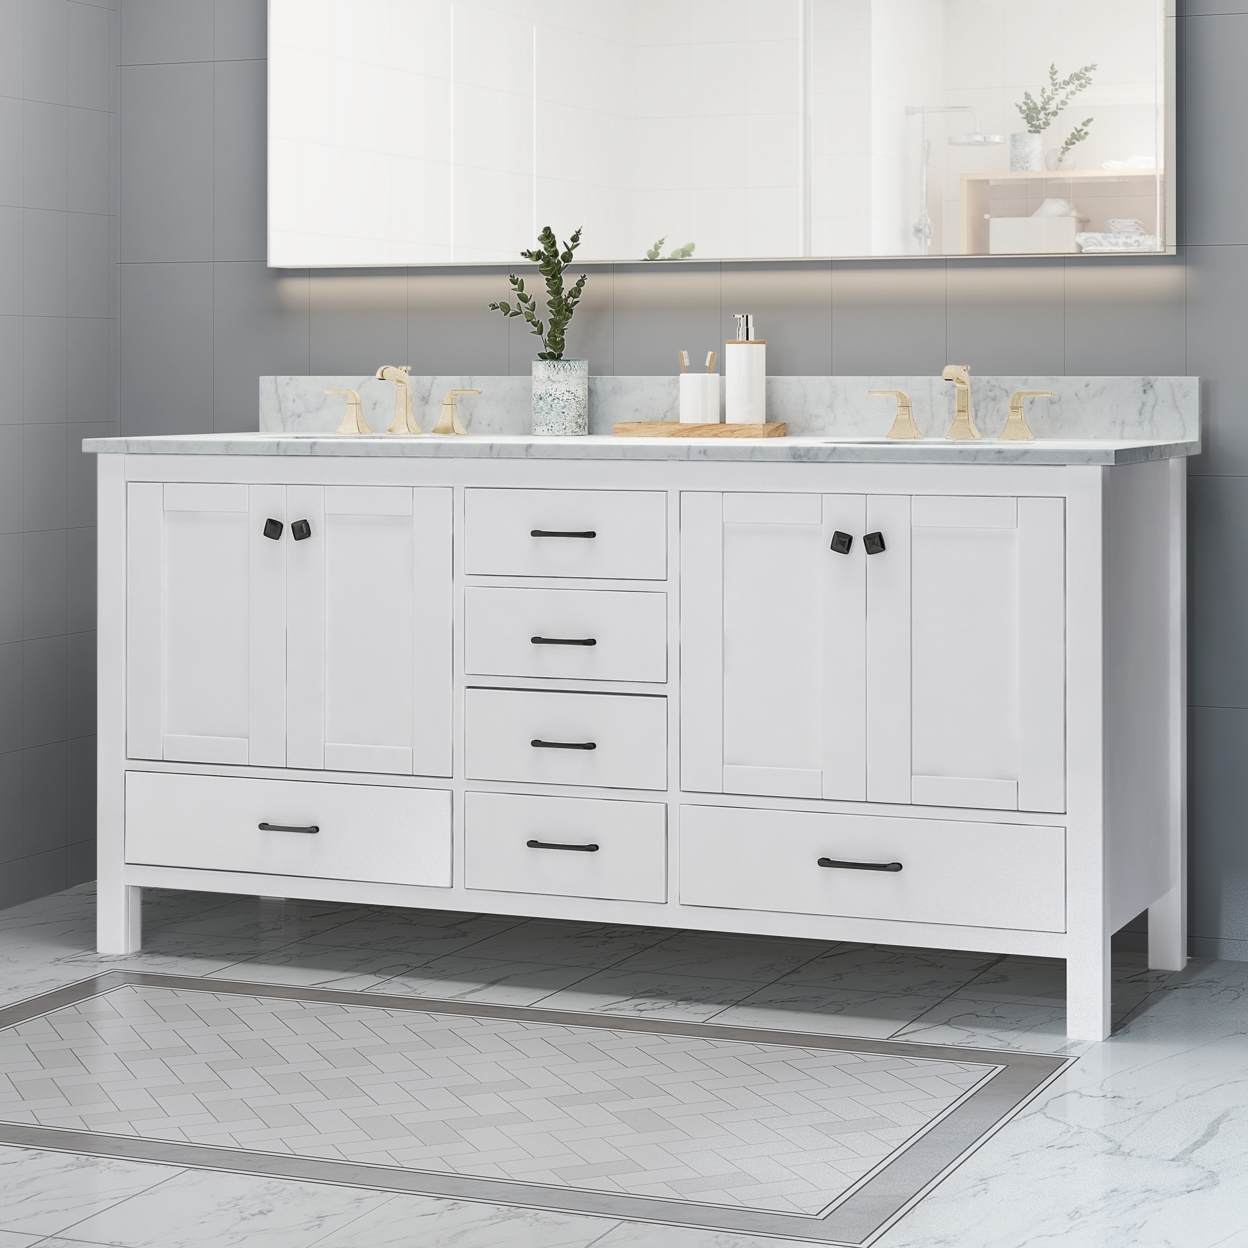 Laranne Contemporary 72 Wood Double Sink Bathroom Vanity With Marble Counter Top With Carrara White Marble - White